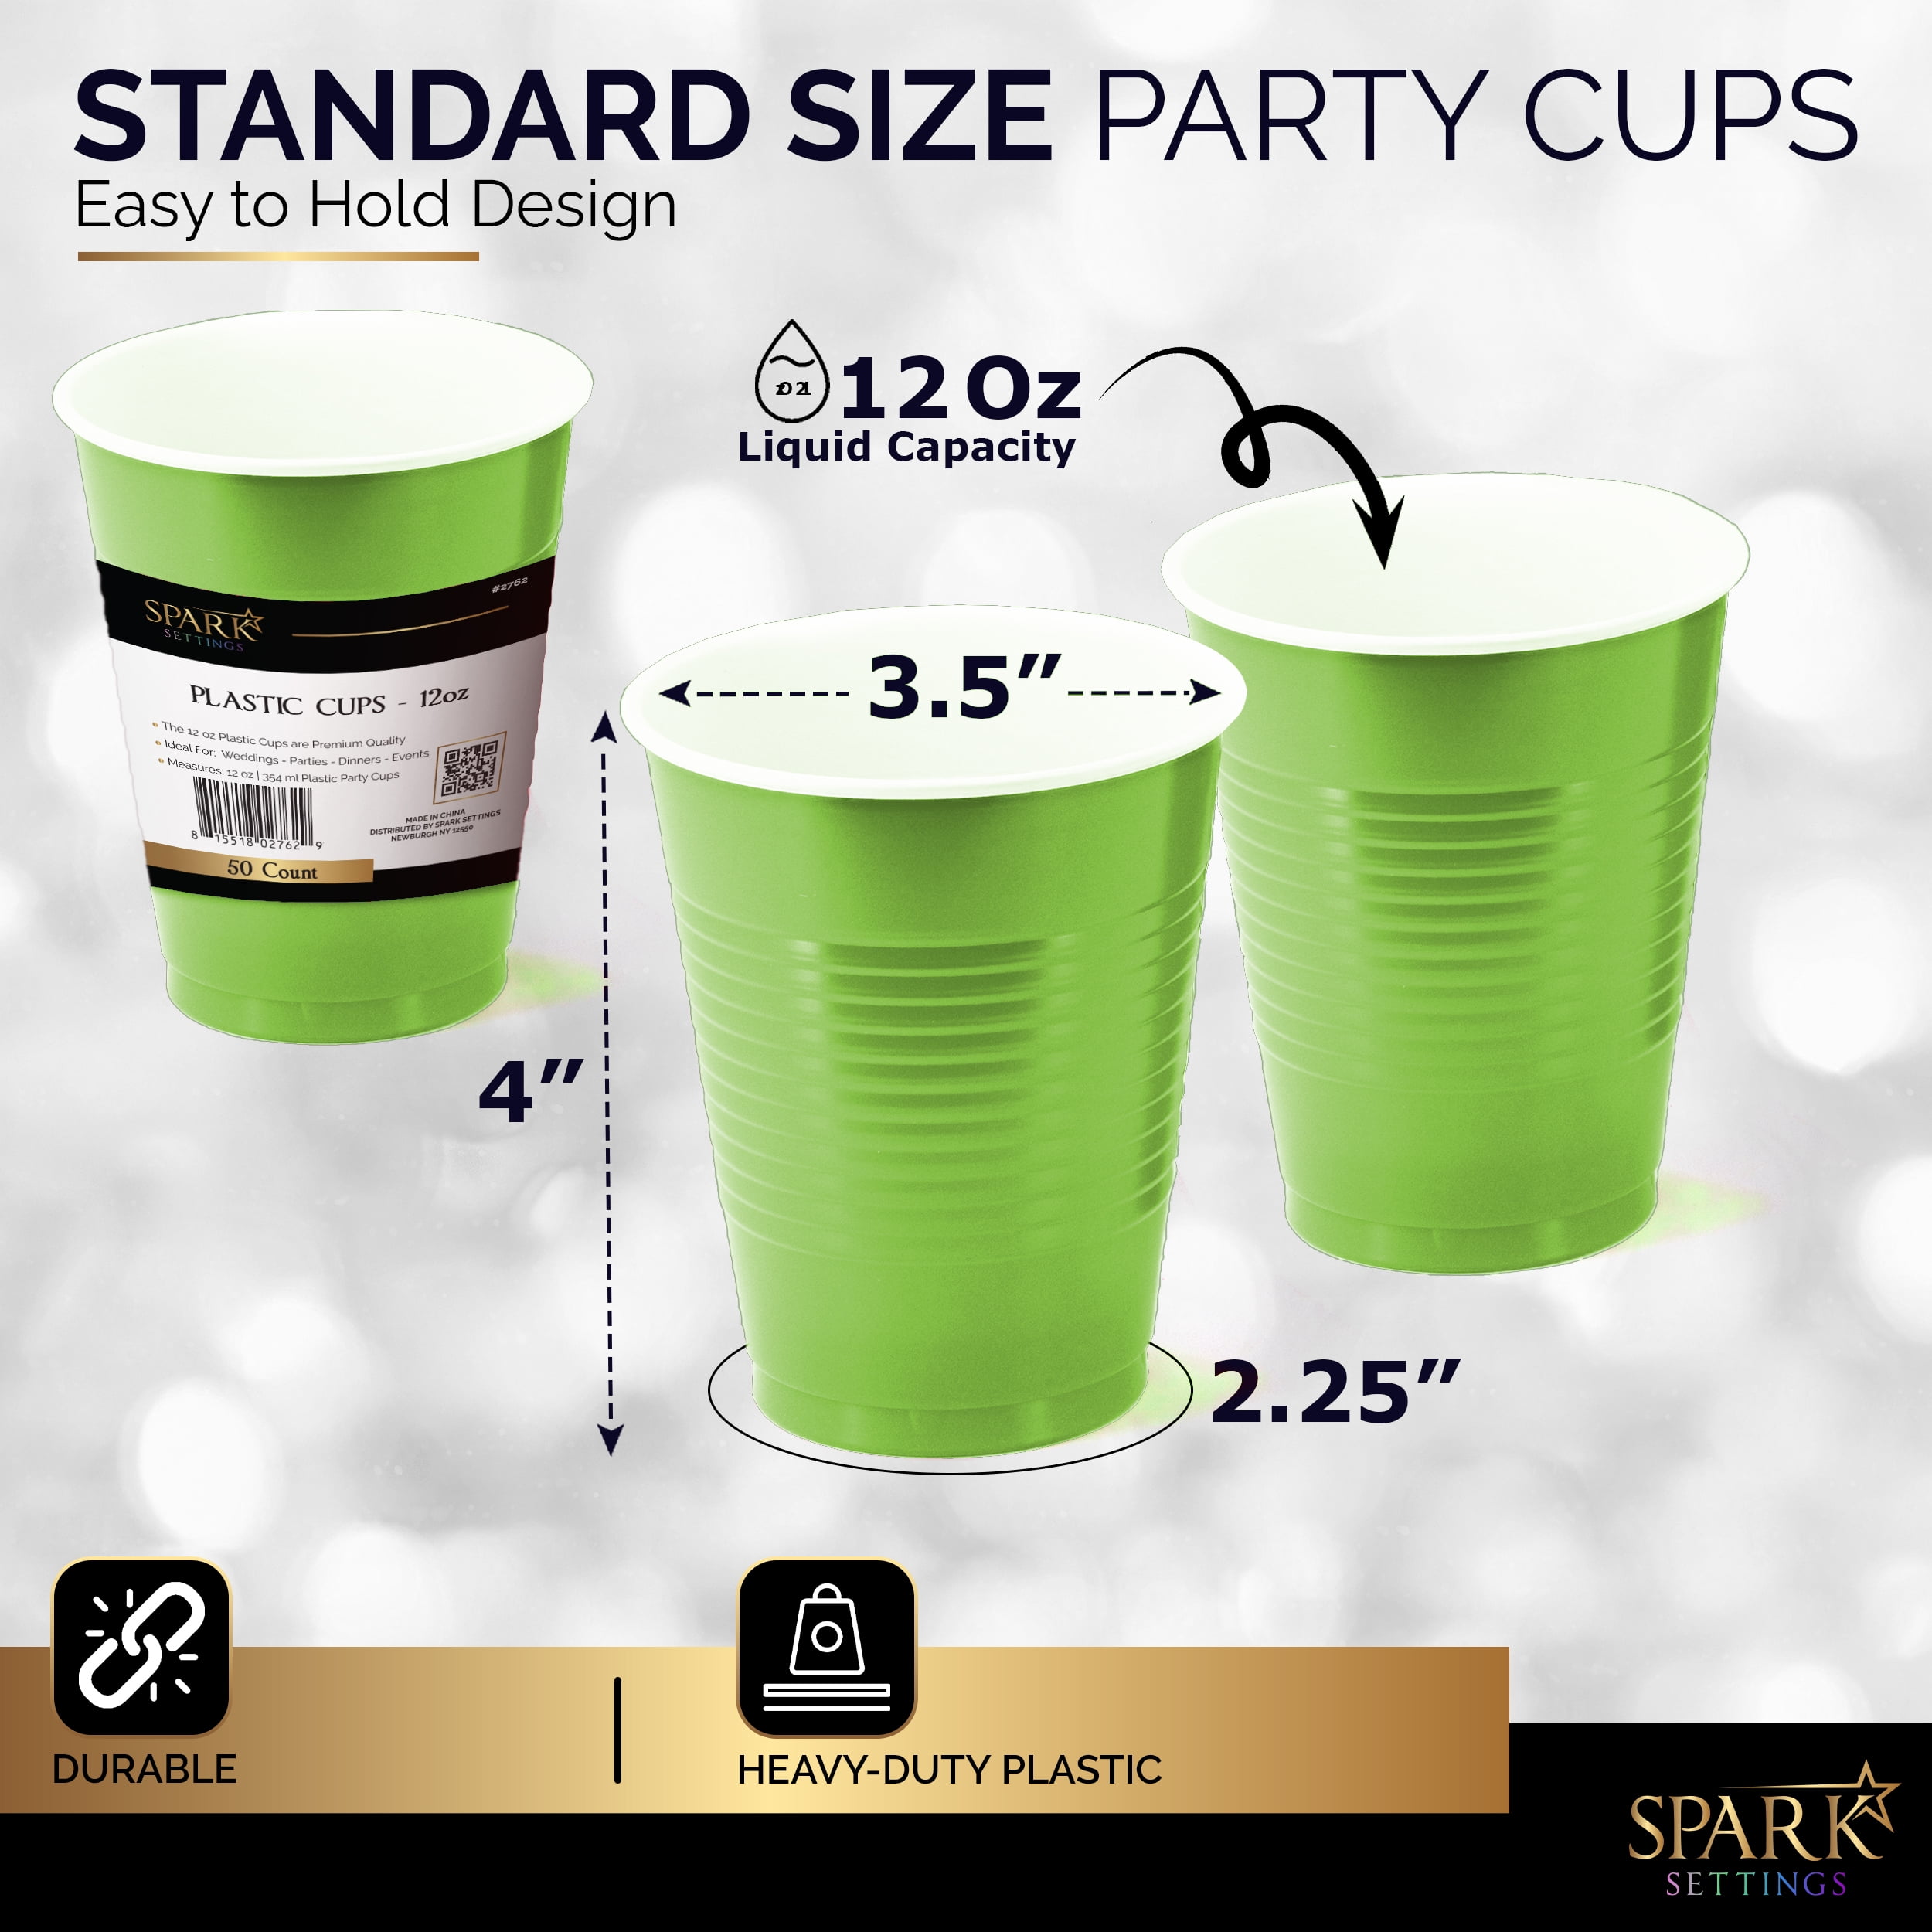 DecorRack 120 Party Cups 12 oz Disposable Plastic Cups for